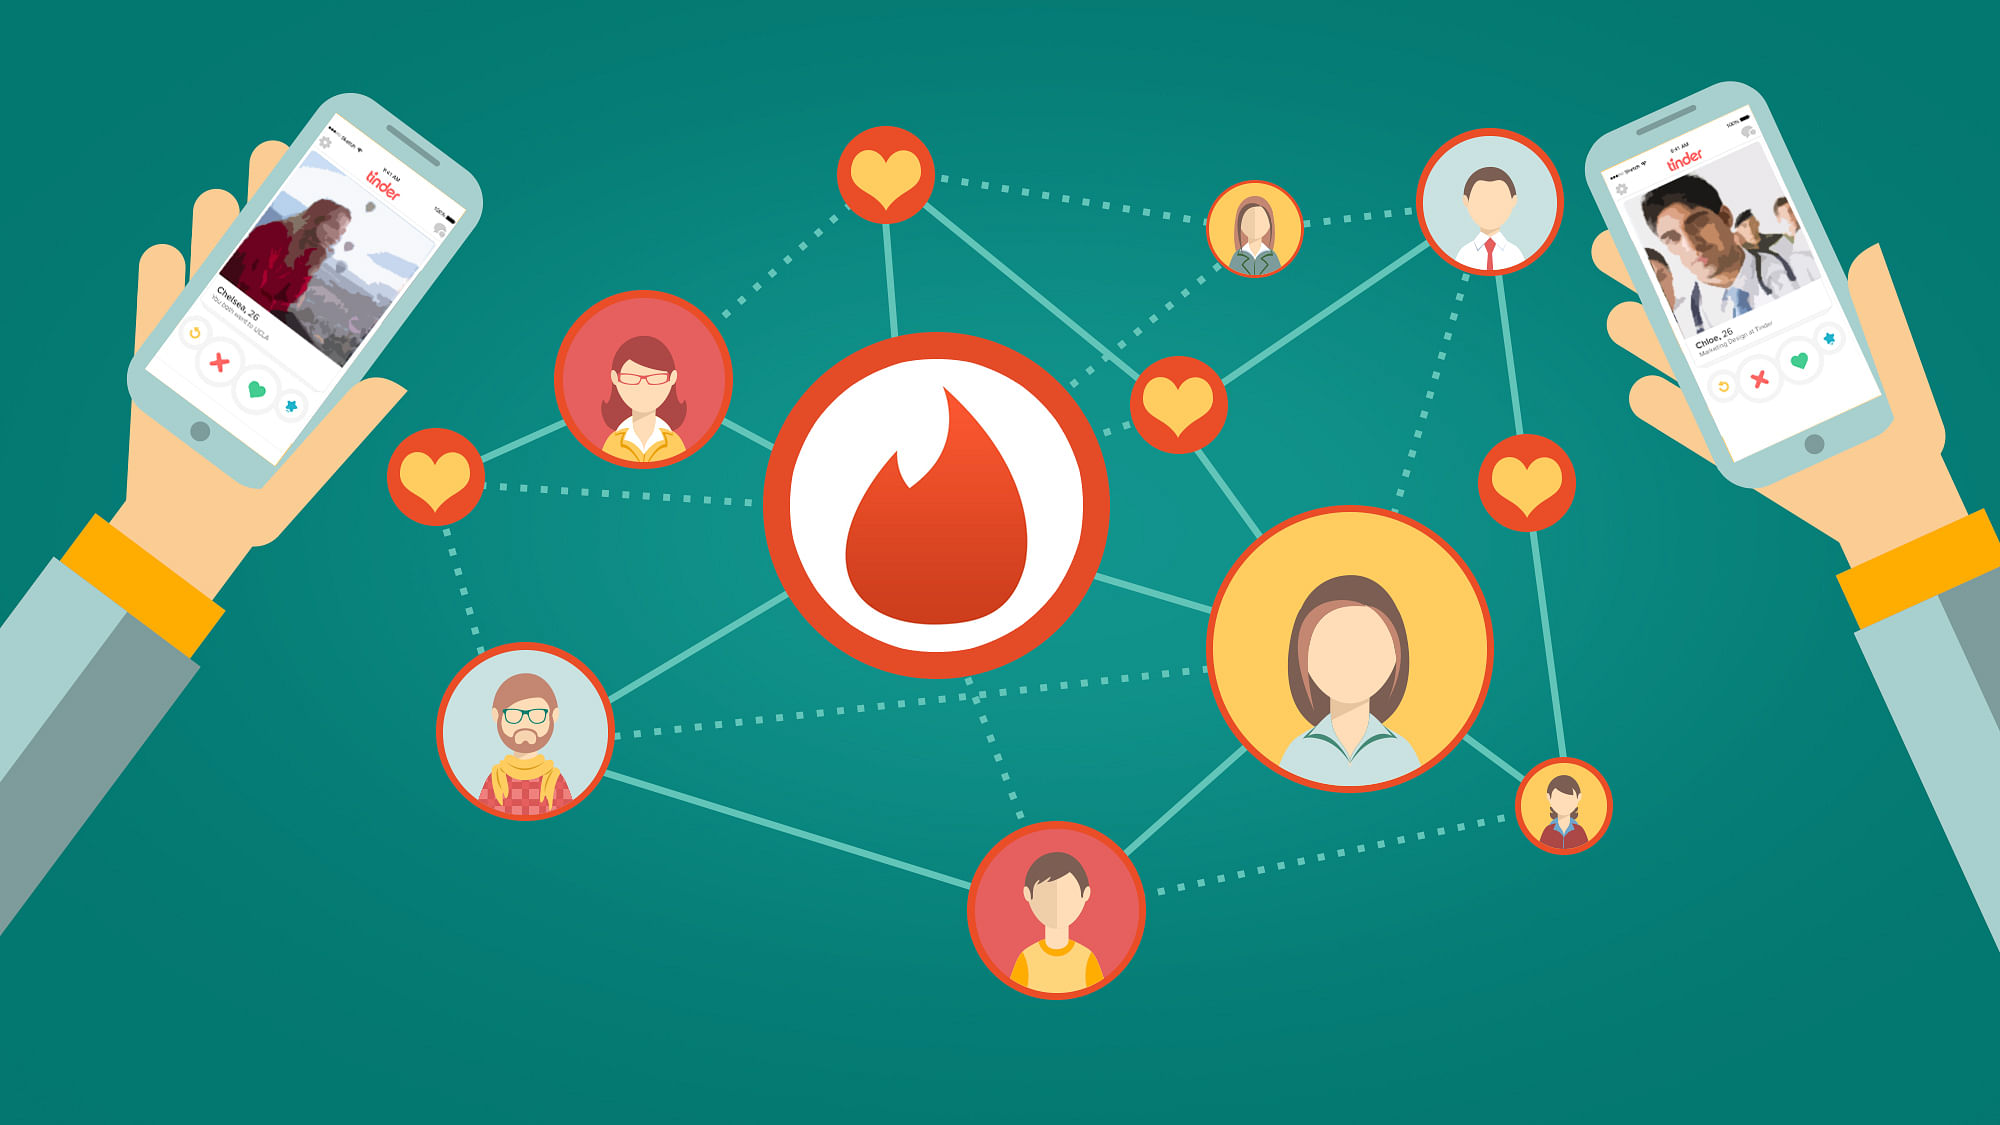 Tinder has a user base of more than 50 million users globally.